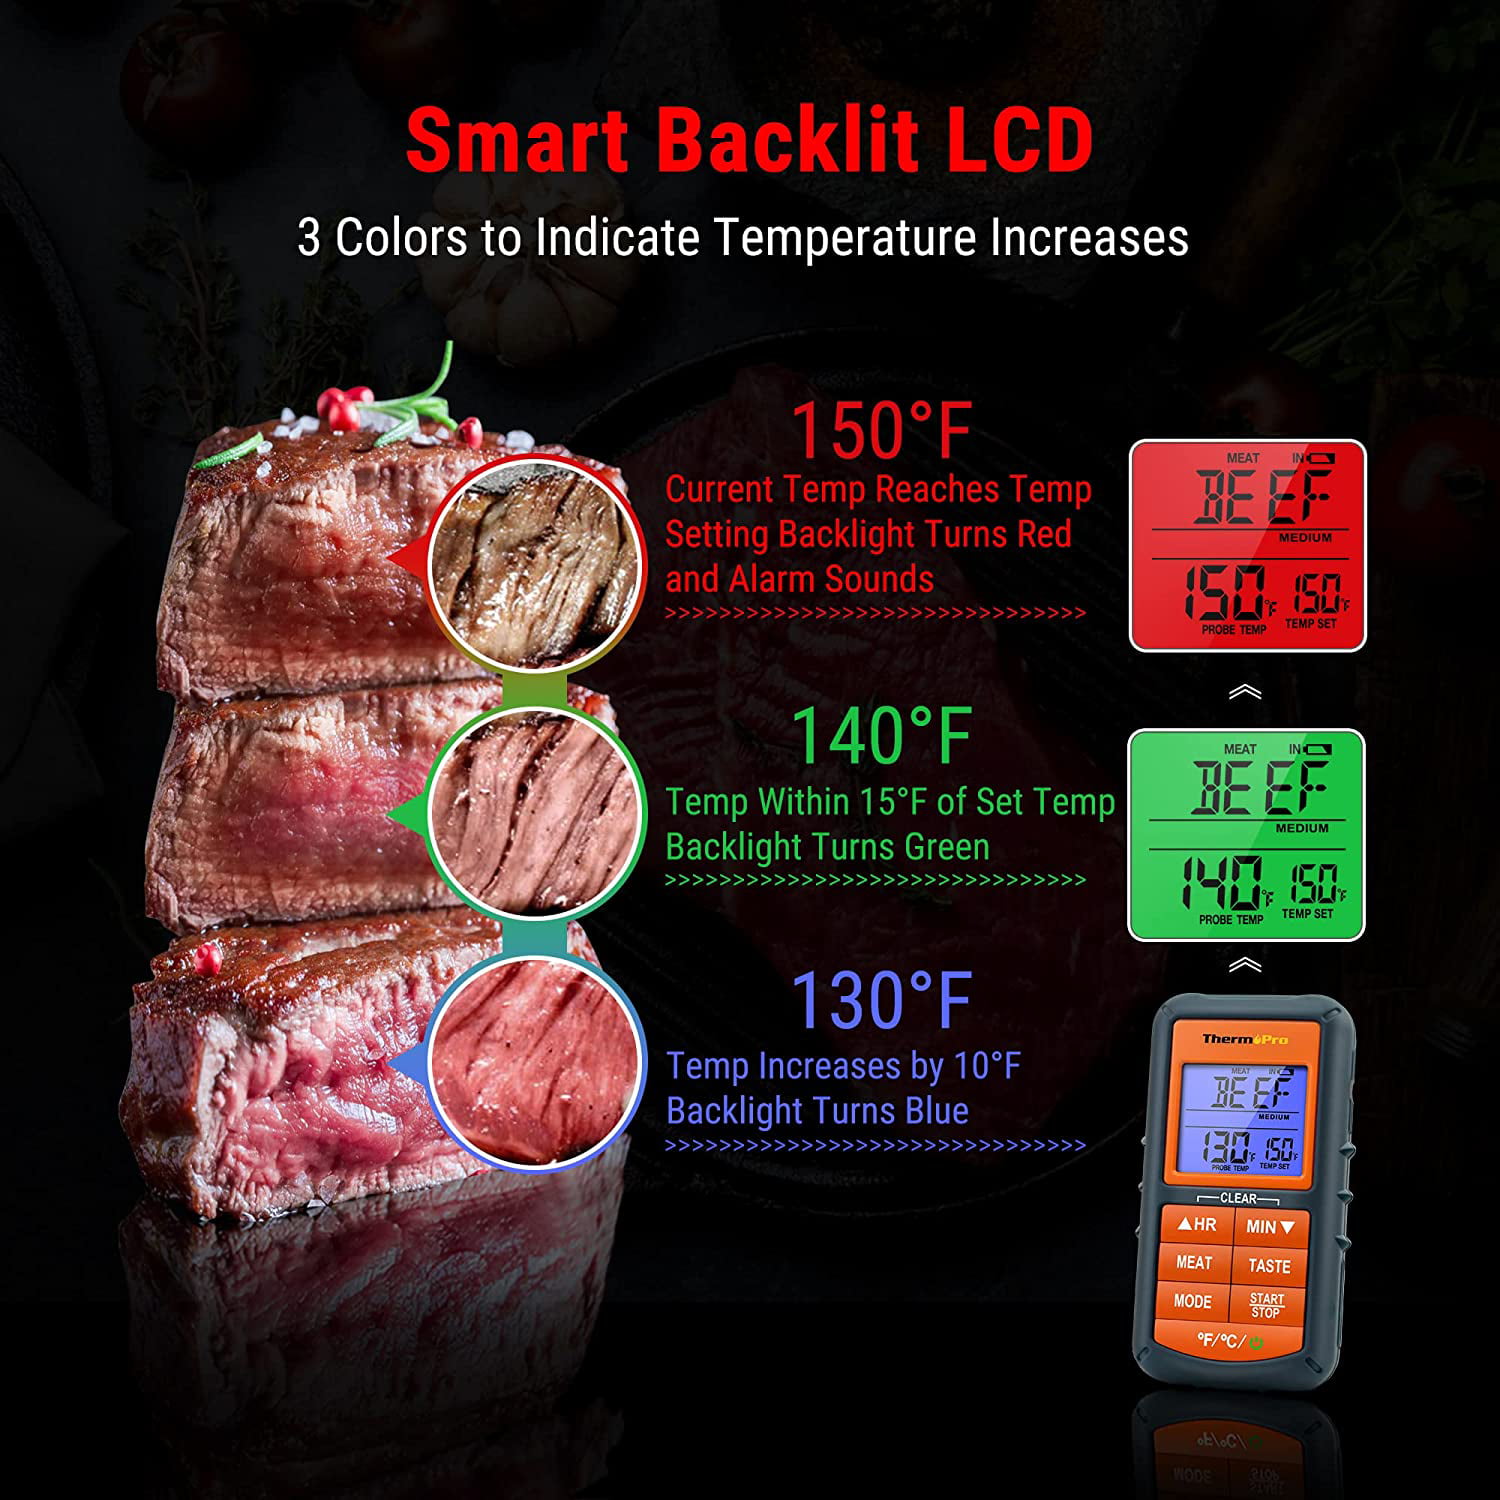 ThermoPro Wireless Meat Thermometer with Large LCD Display and Dual  Stainless steel probes for Grilling Smoker TP-806BW - The Home Depot